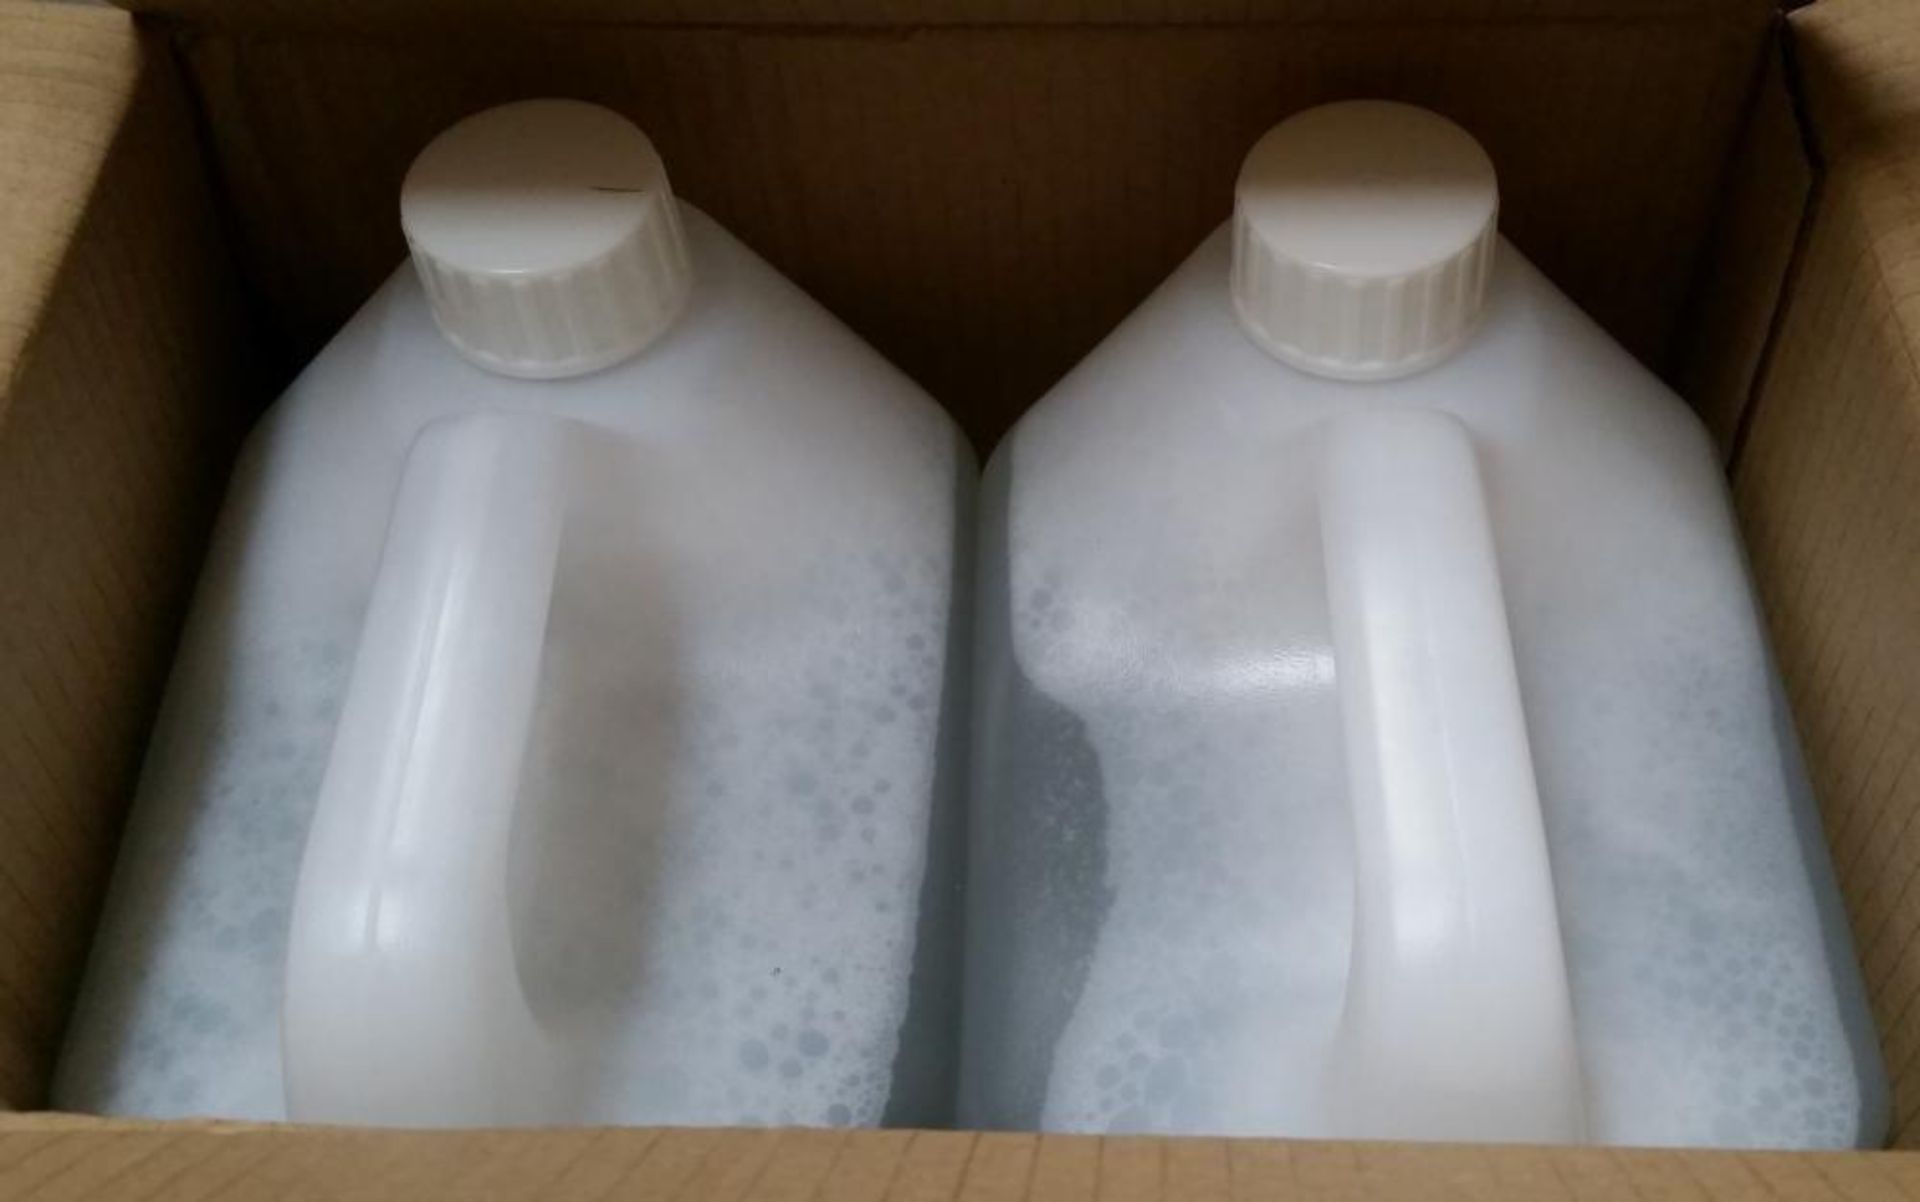 2 x Pro Value 5 Litre Catering Cleaner - Best Before September 2016 - New Boxed Stock - CL083 - Ref - Image 2 of 3